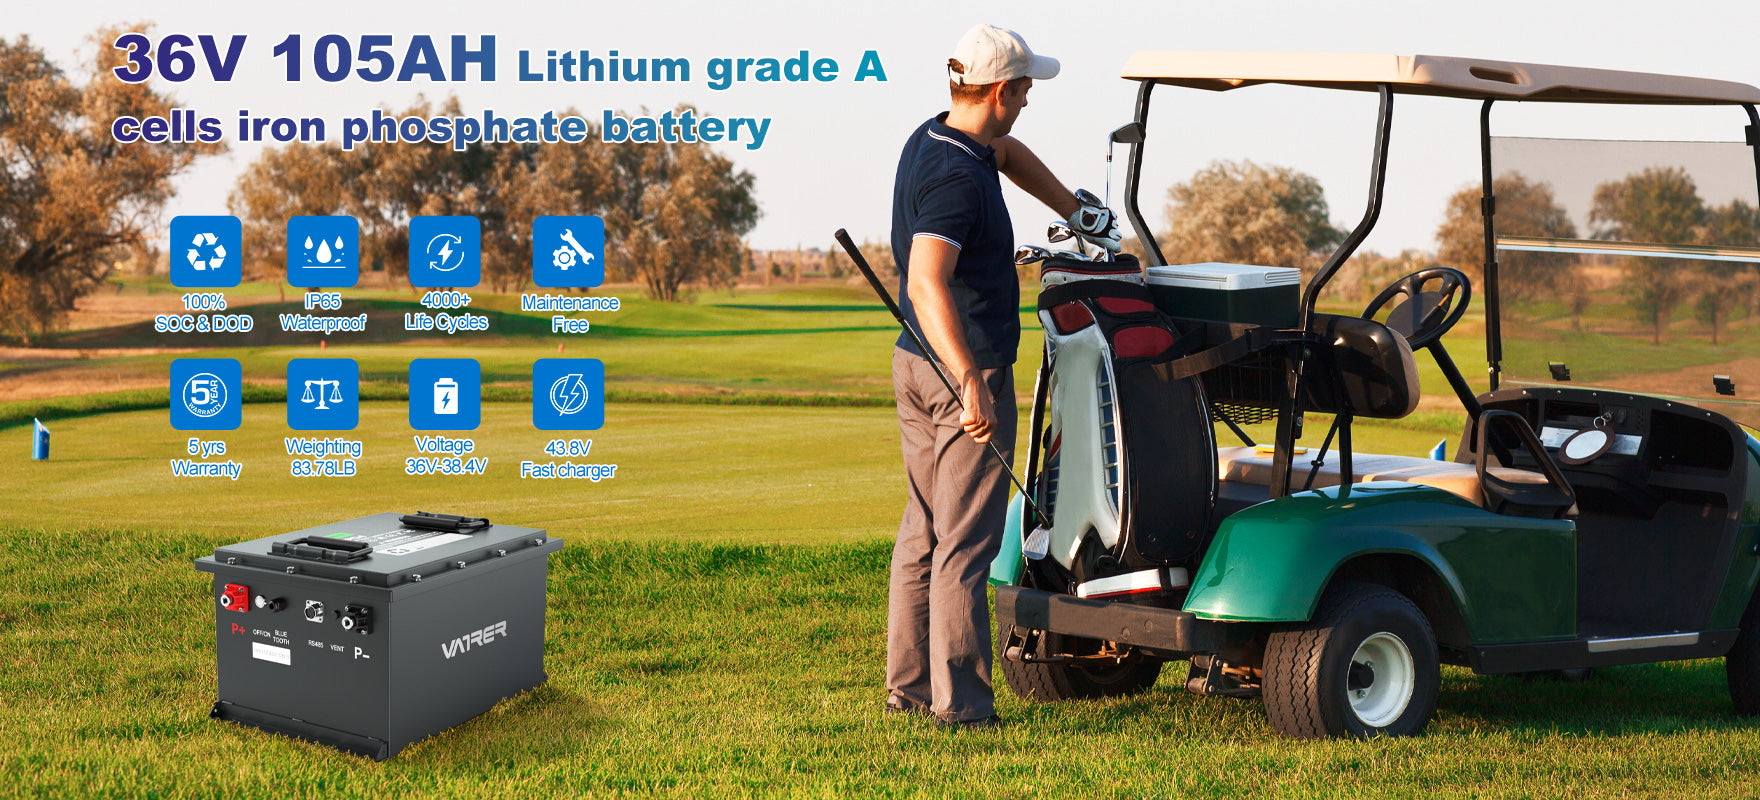 36V 105AH Lithium Grade A Cells Iron Phosphate Battery